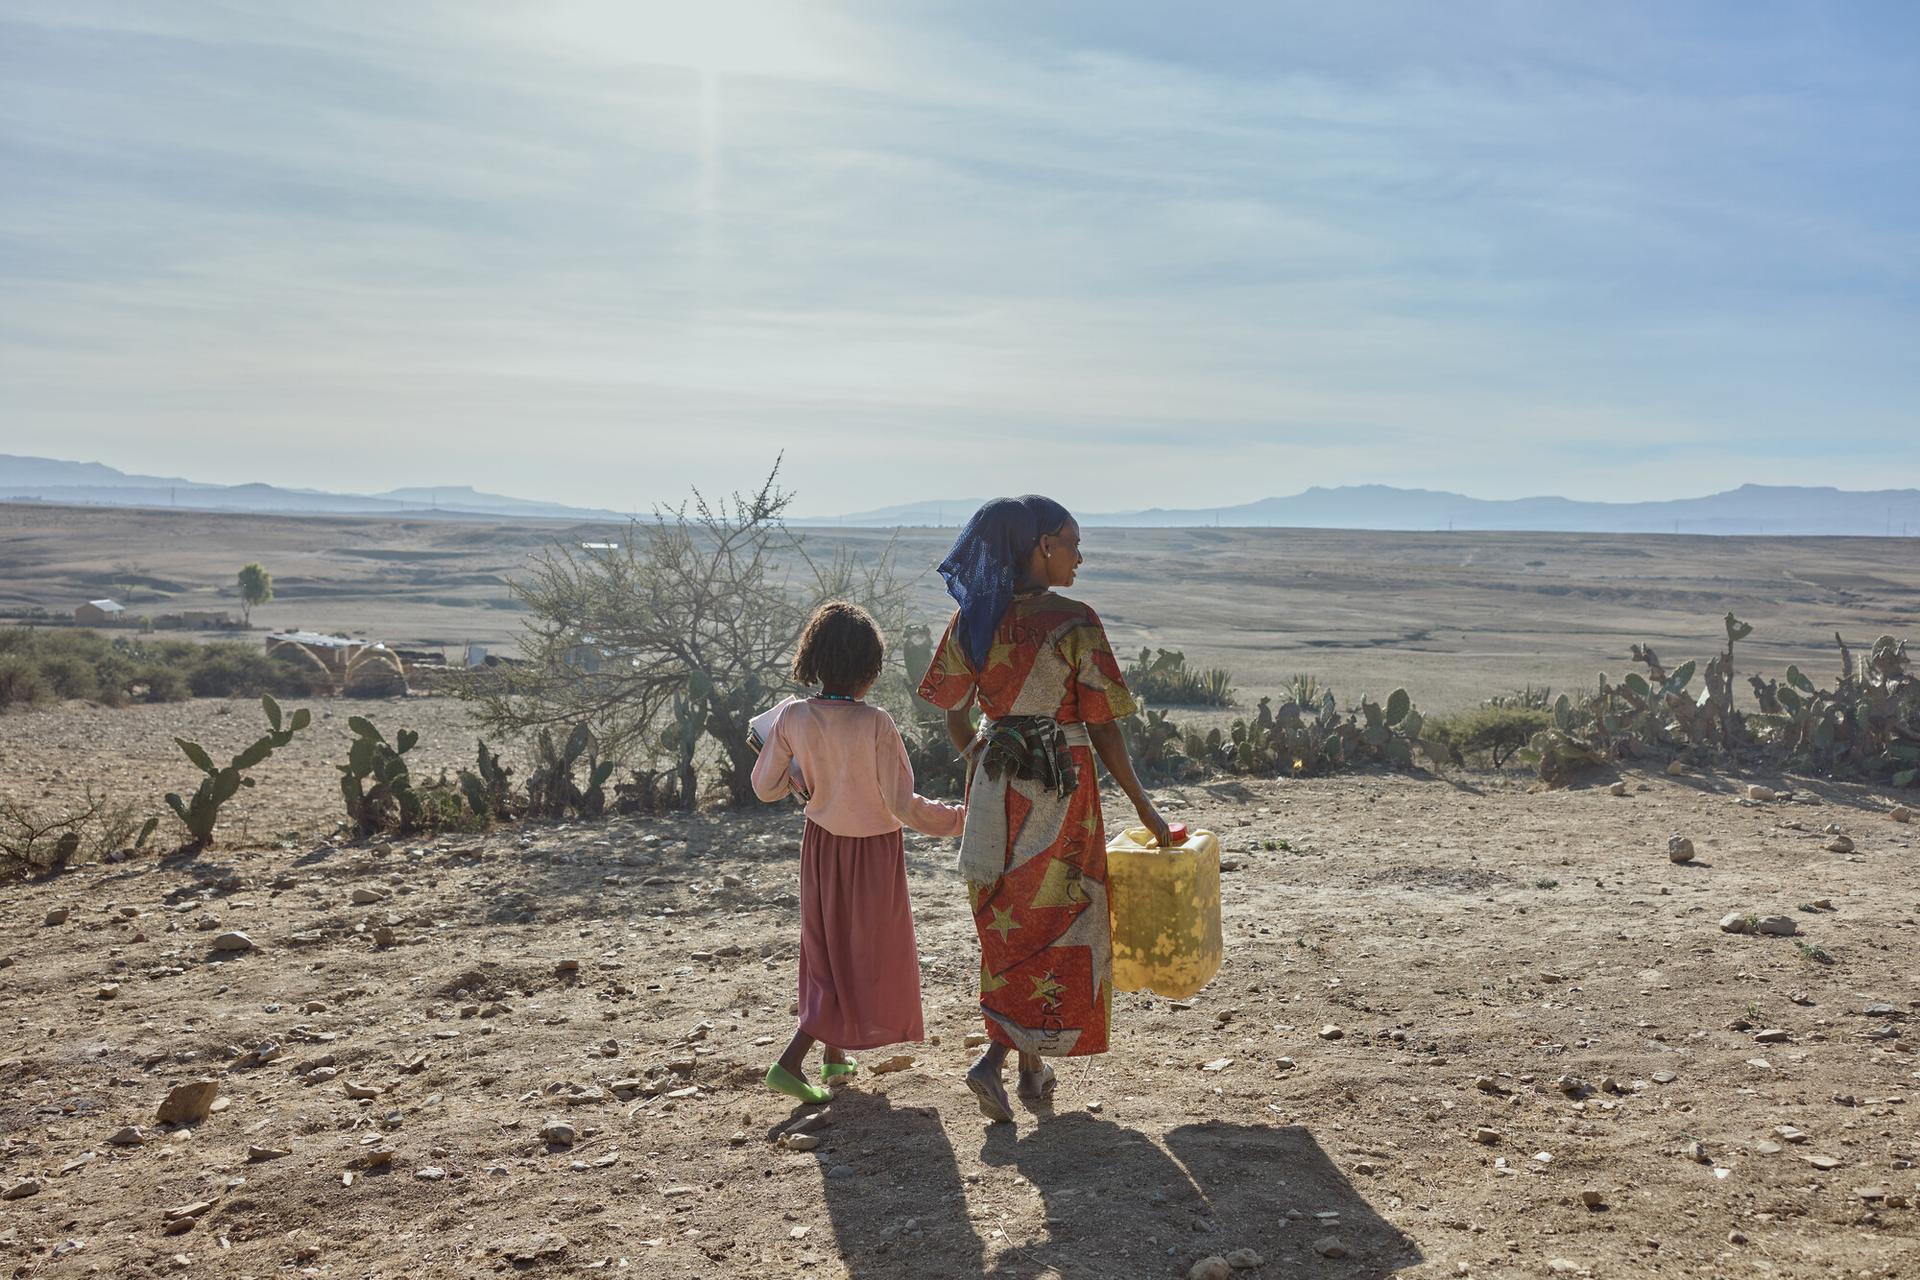 Mary’s Meals provides hope in Ethiopia’s troubled Tigray region